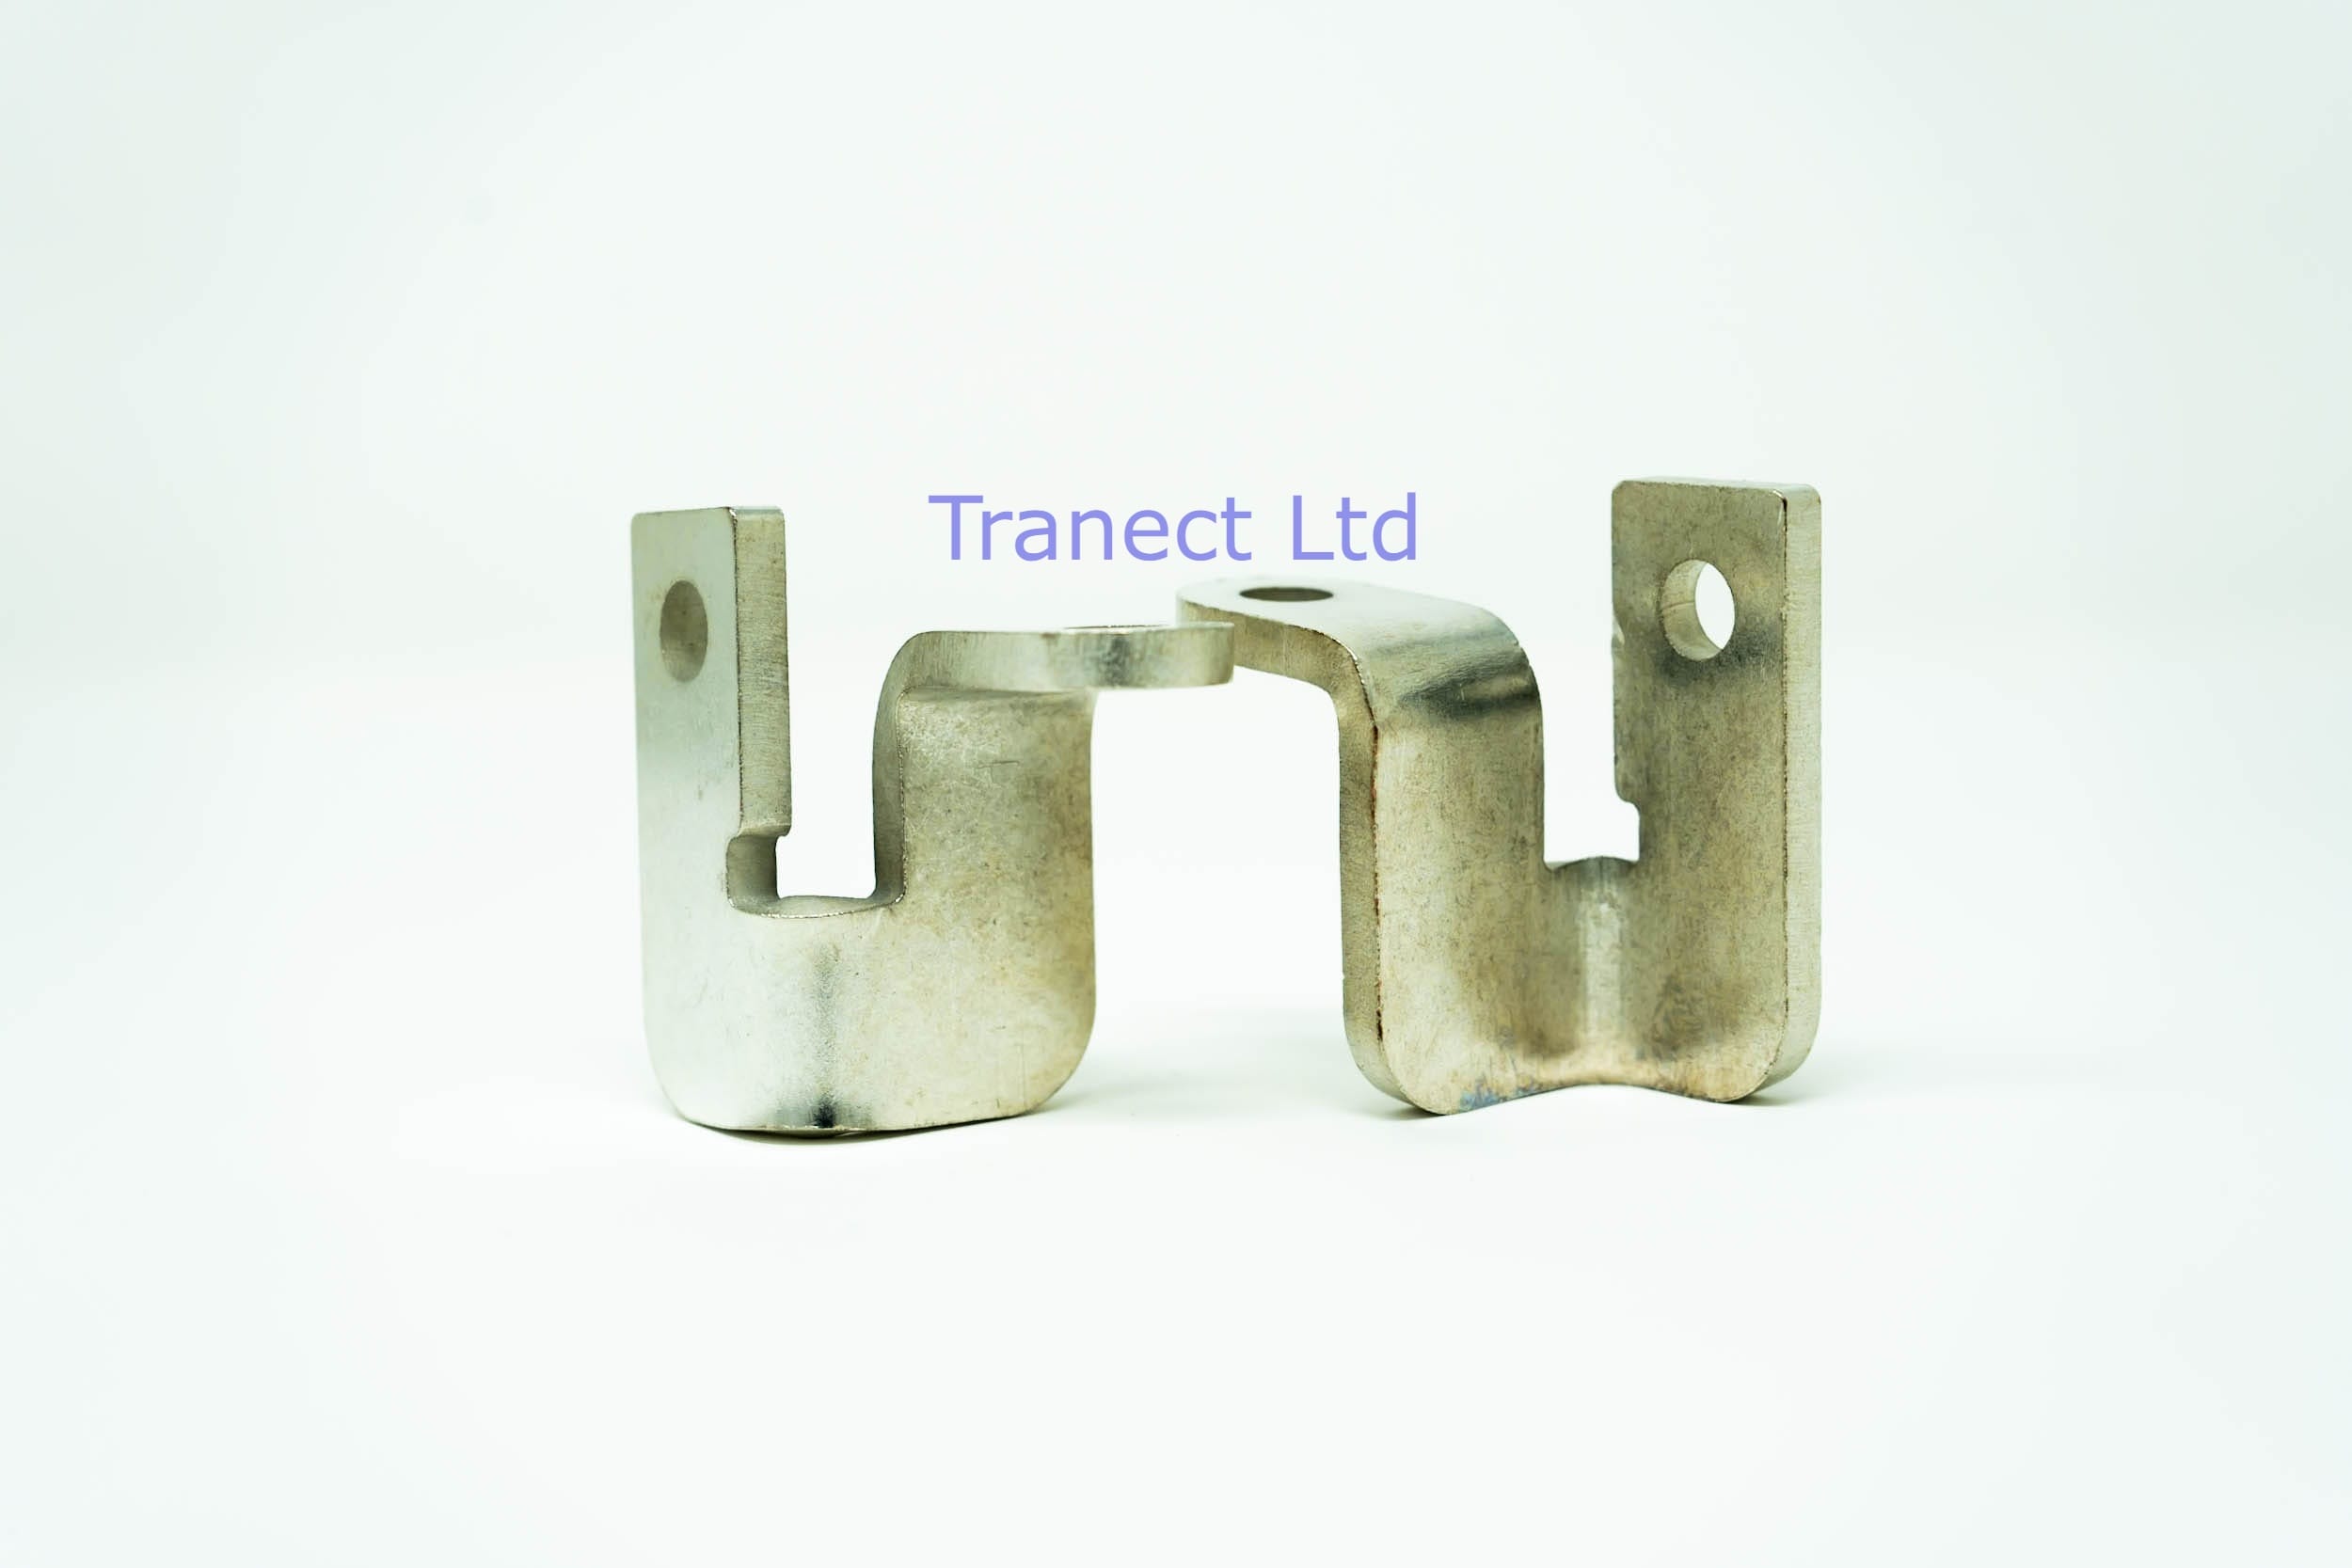 Tin plated copper busbars